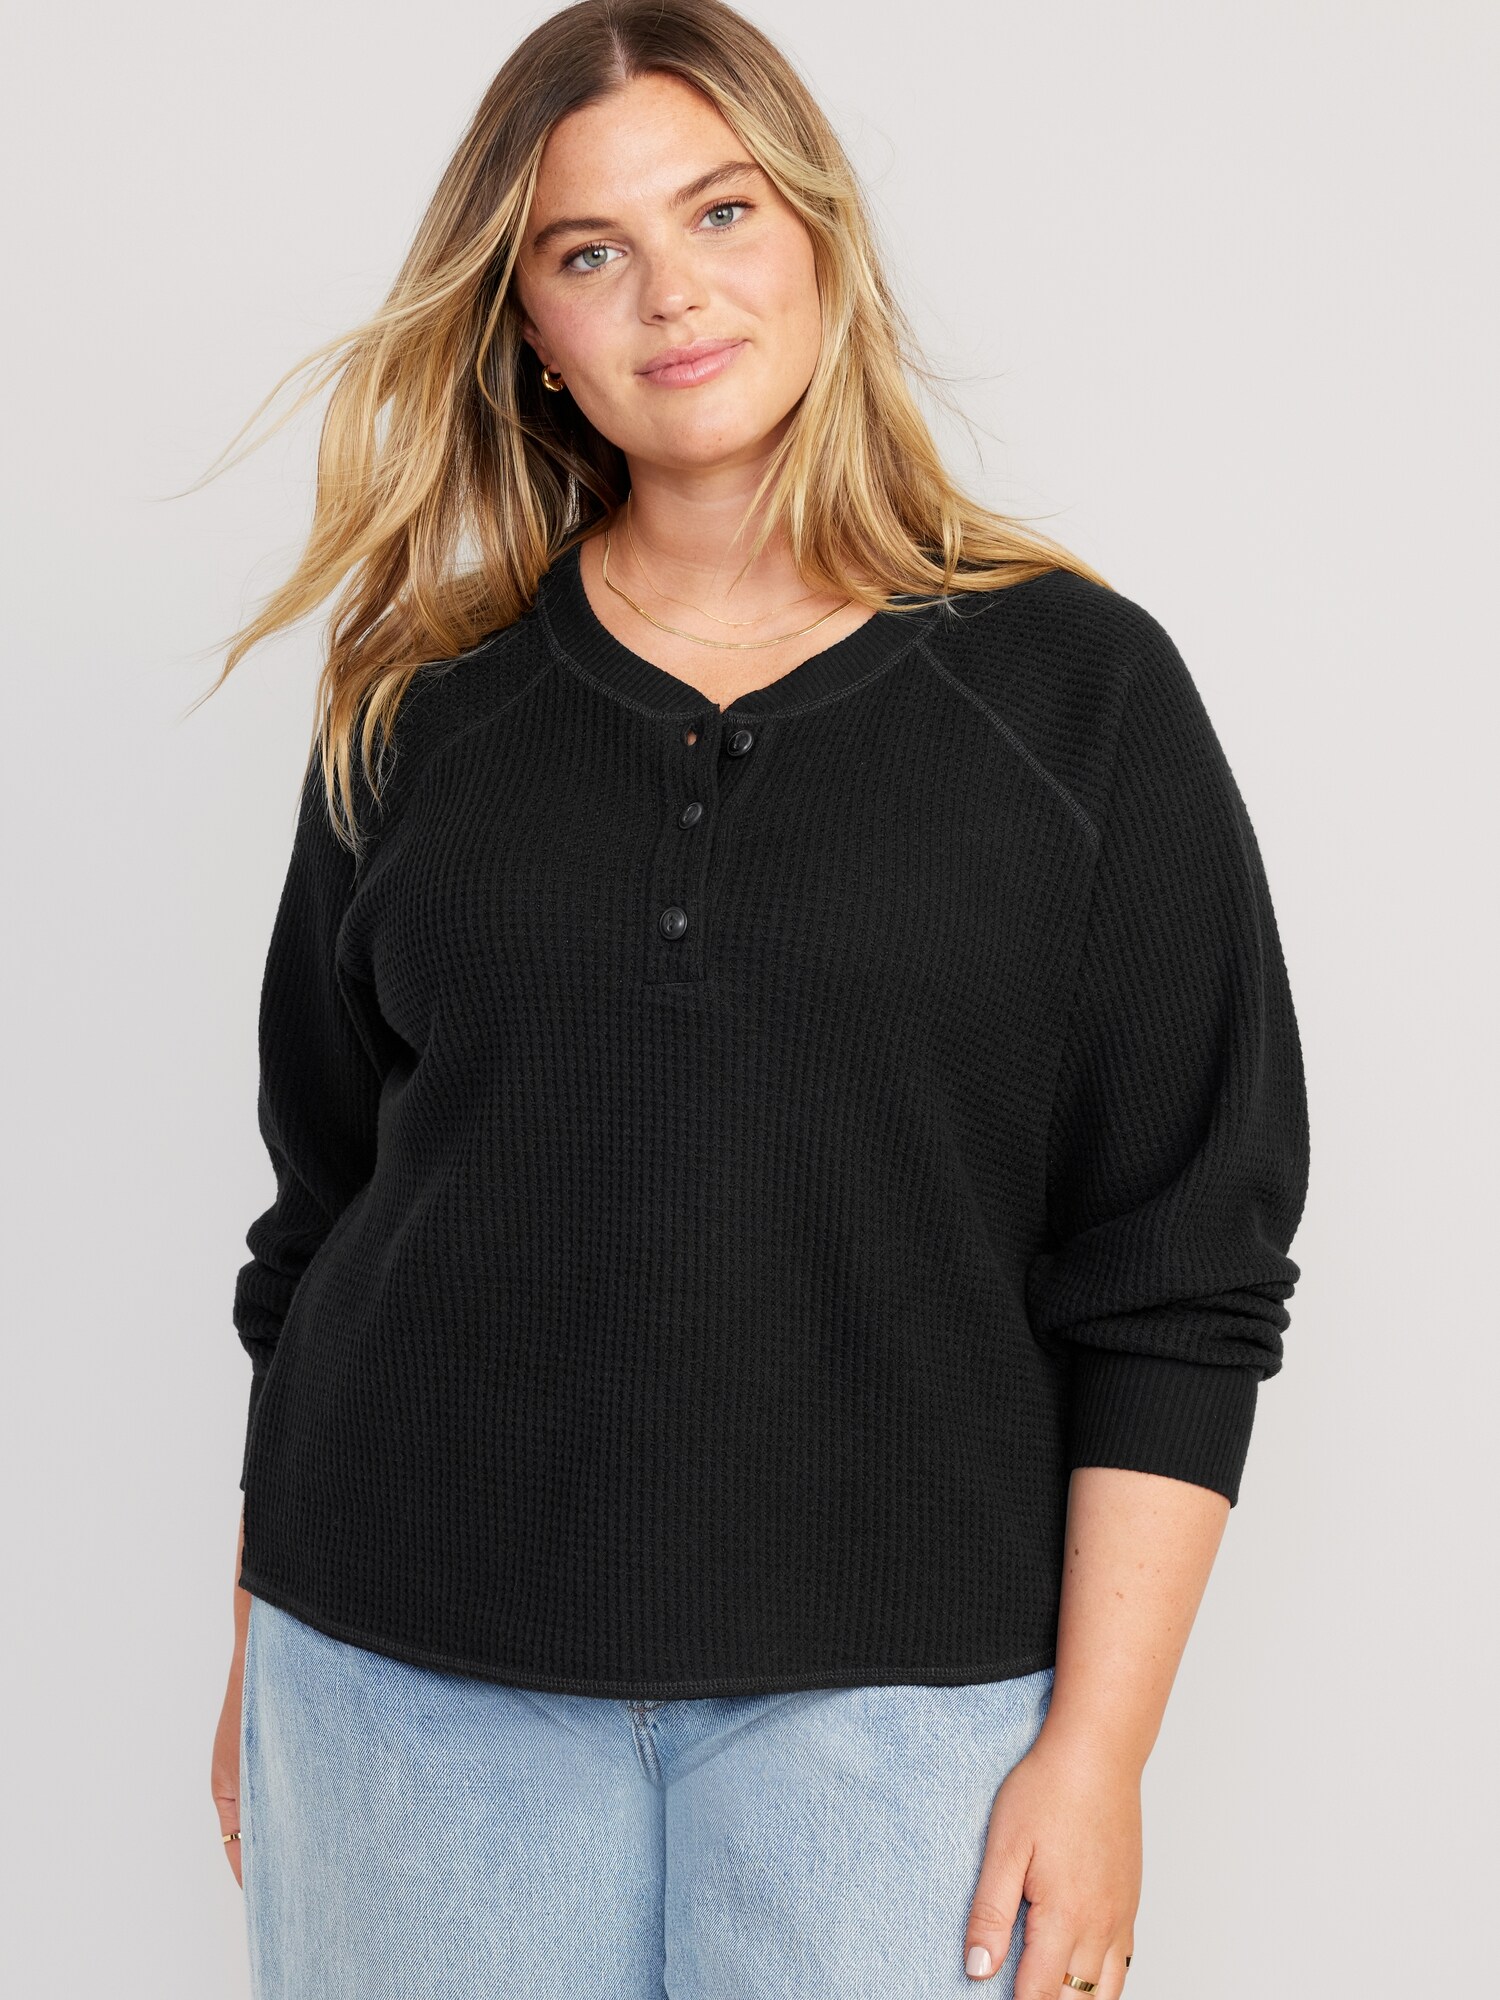 Plush Waffle-Knit Henley Top | Old Navy